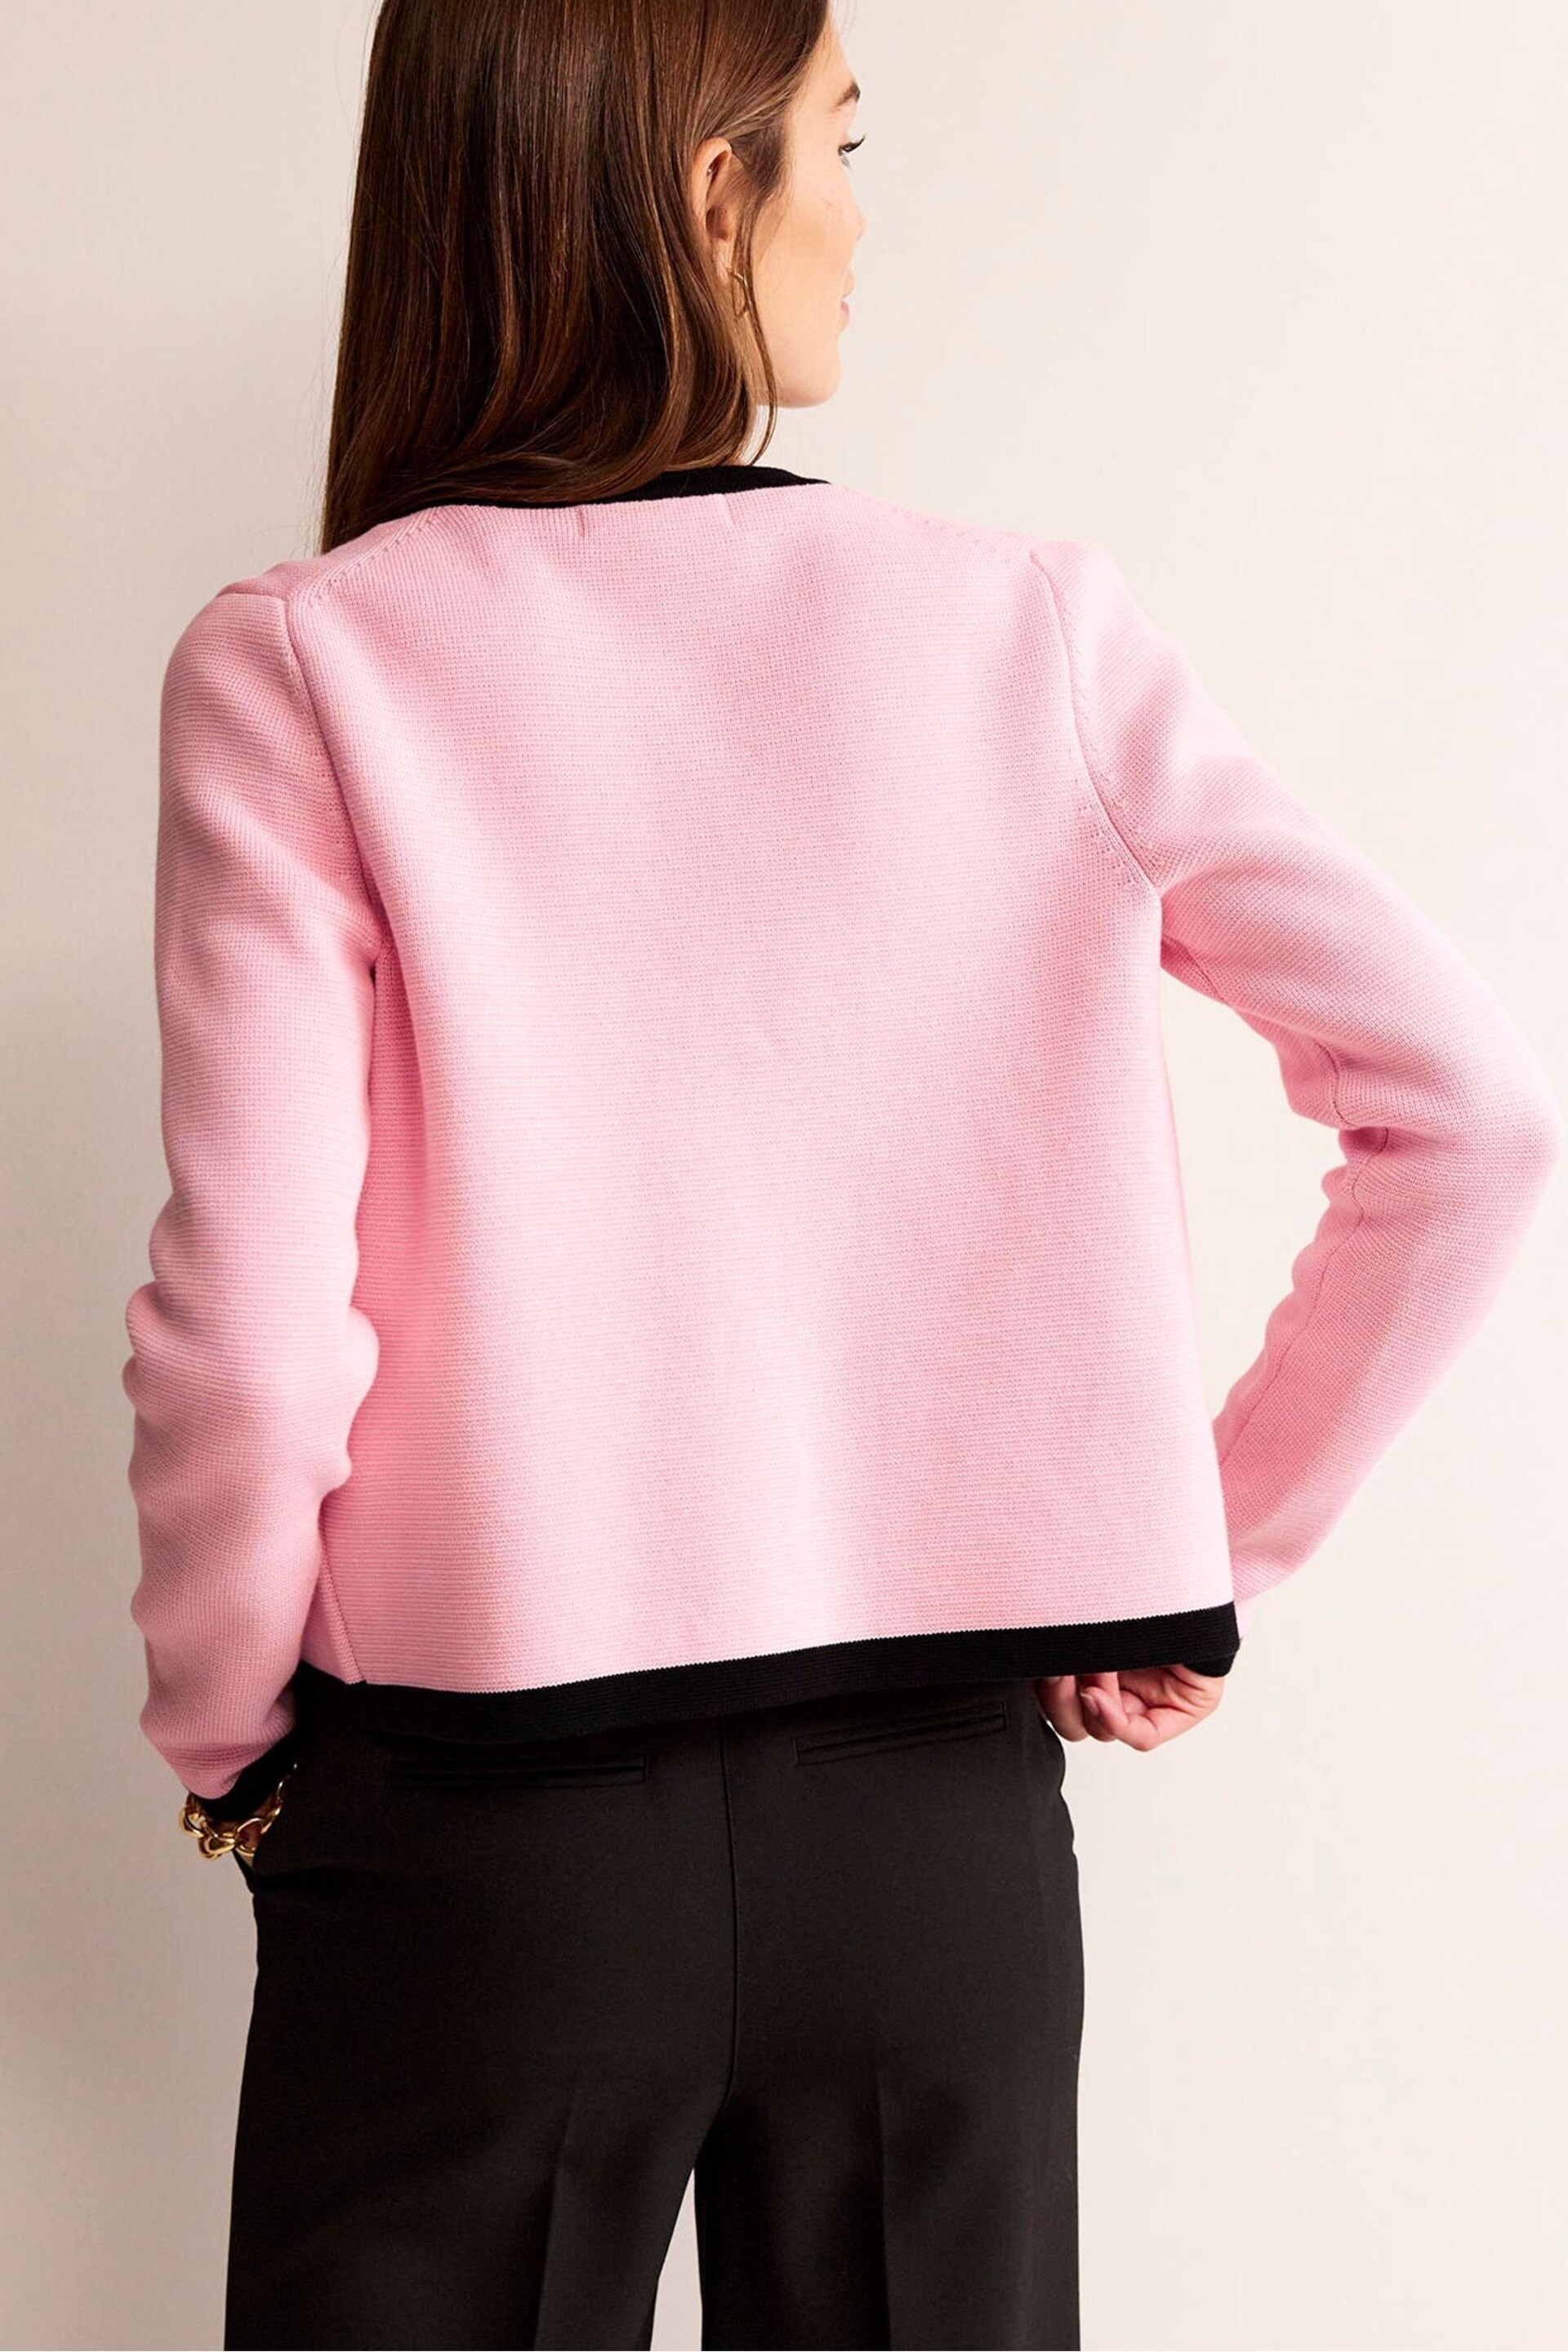 Boden Pink Holly Cropped Knitted Cardigan - Image 2 of 7